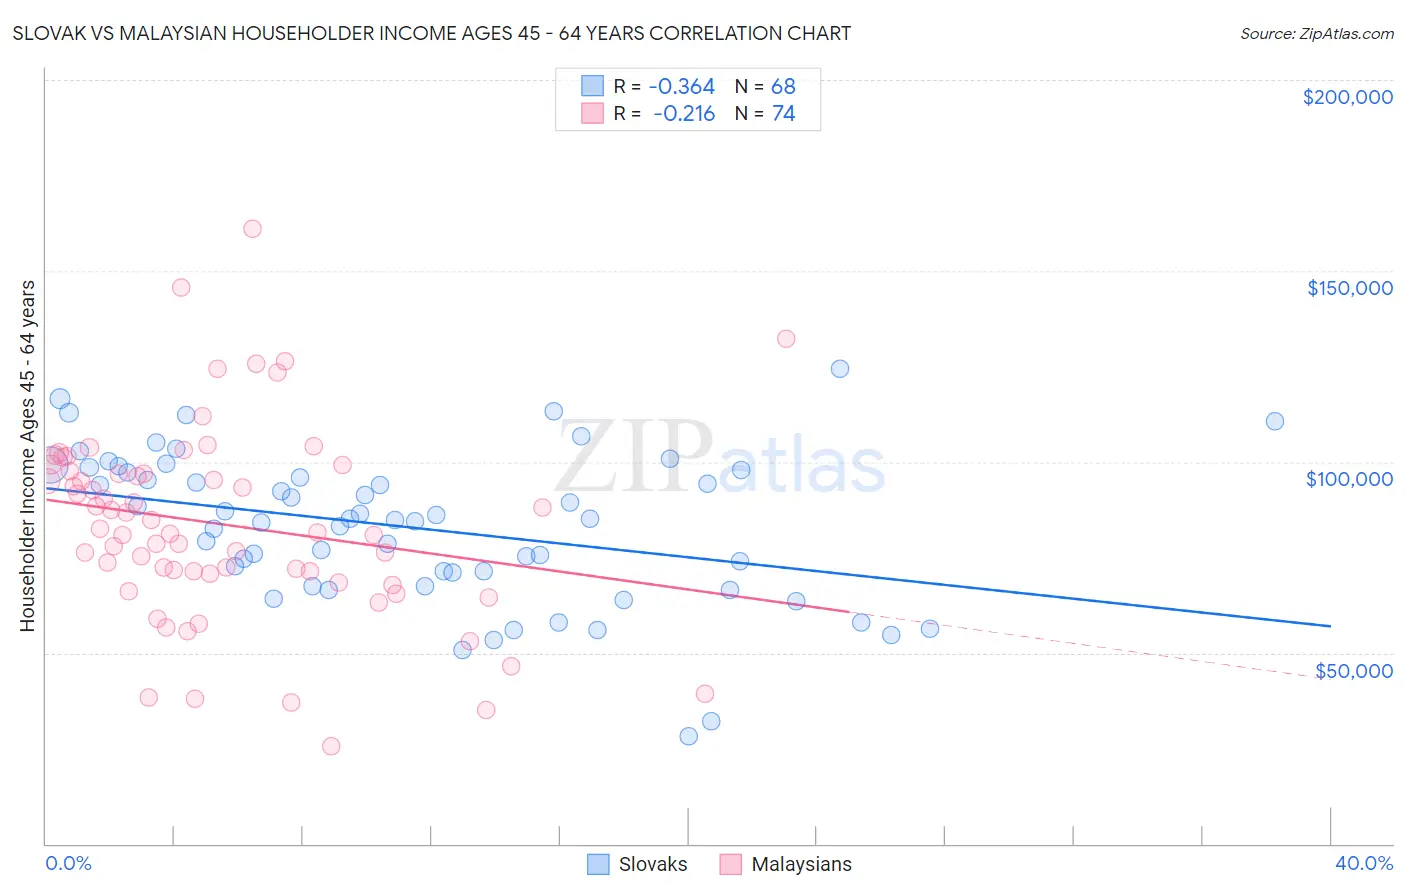 Slovak vs Malaysian Householder Income Ages 45 - 64 years